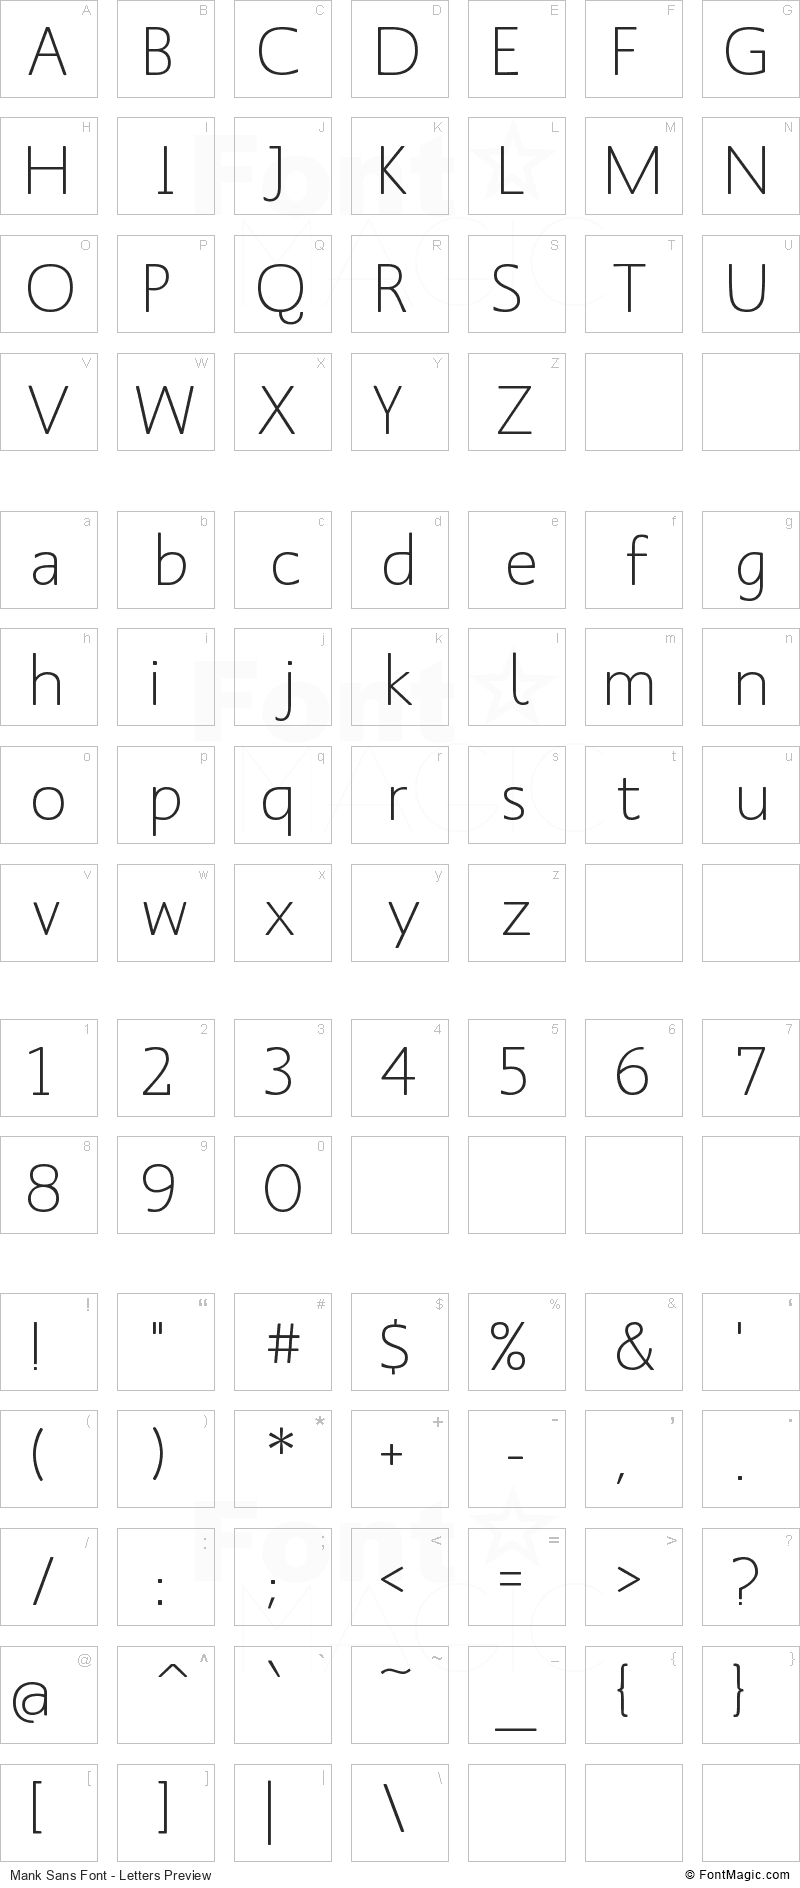 Mank Sans Font - All Latters Preview Chart